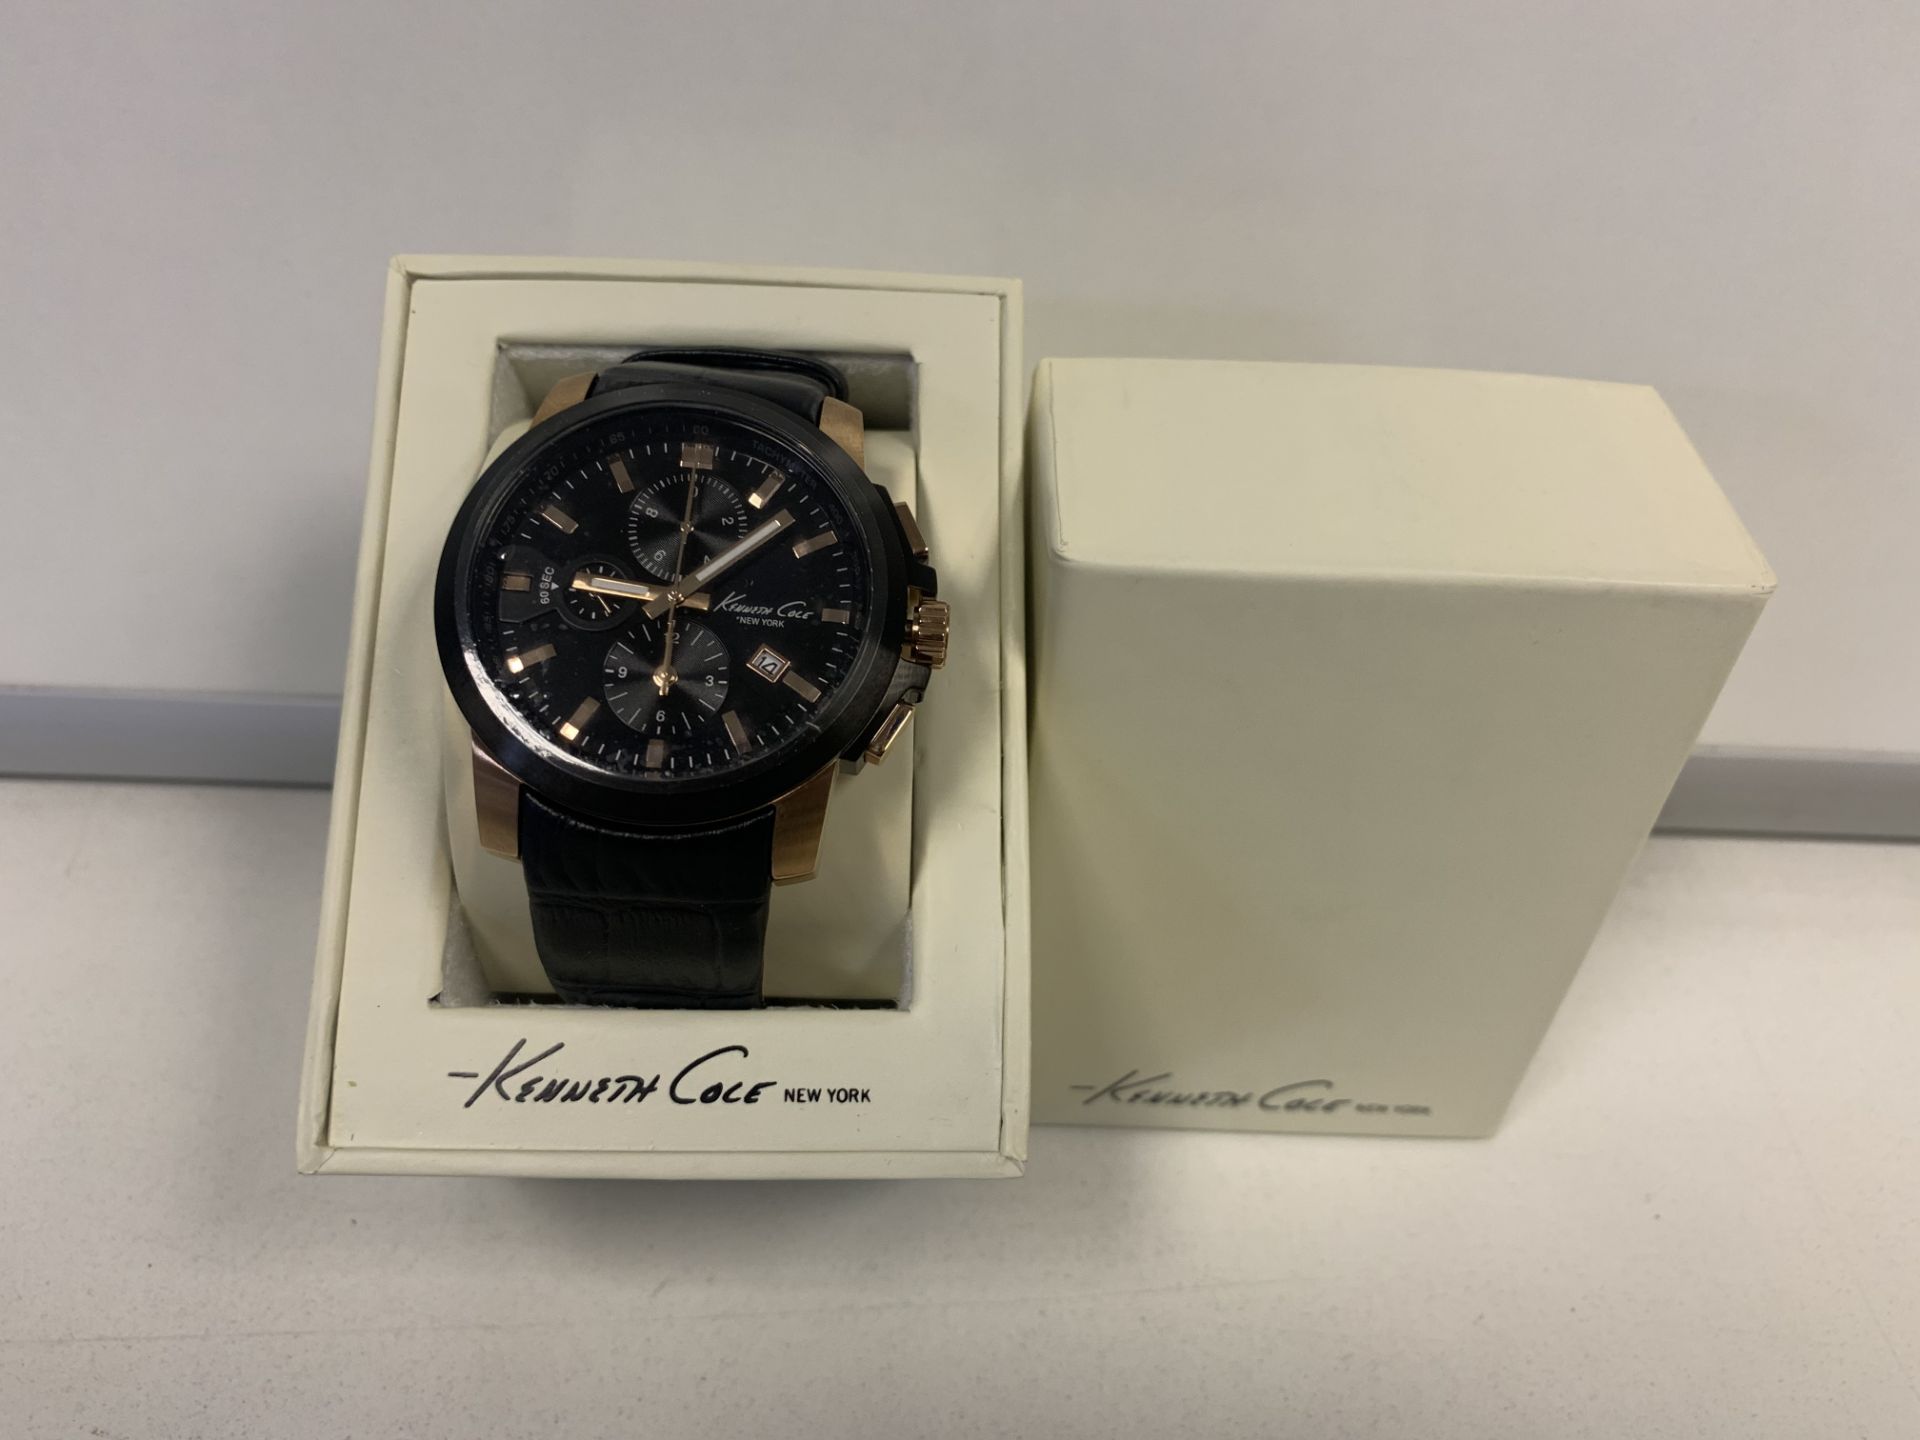 BRAND NEW RETAIL BOXED KENNETH COLE NEW YORK MENS WATCH